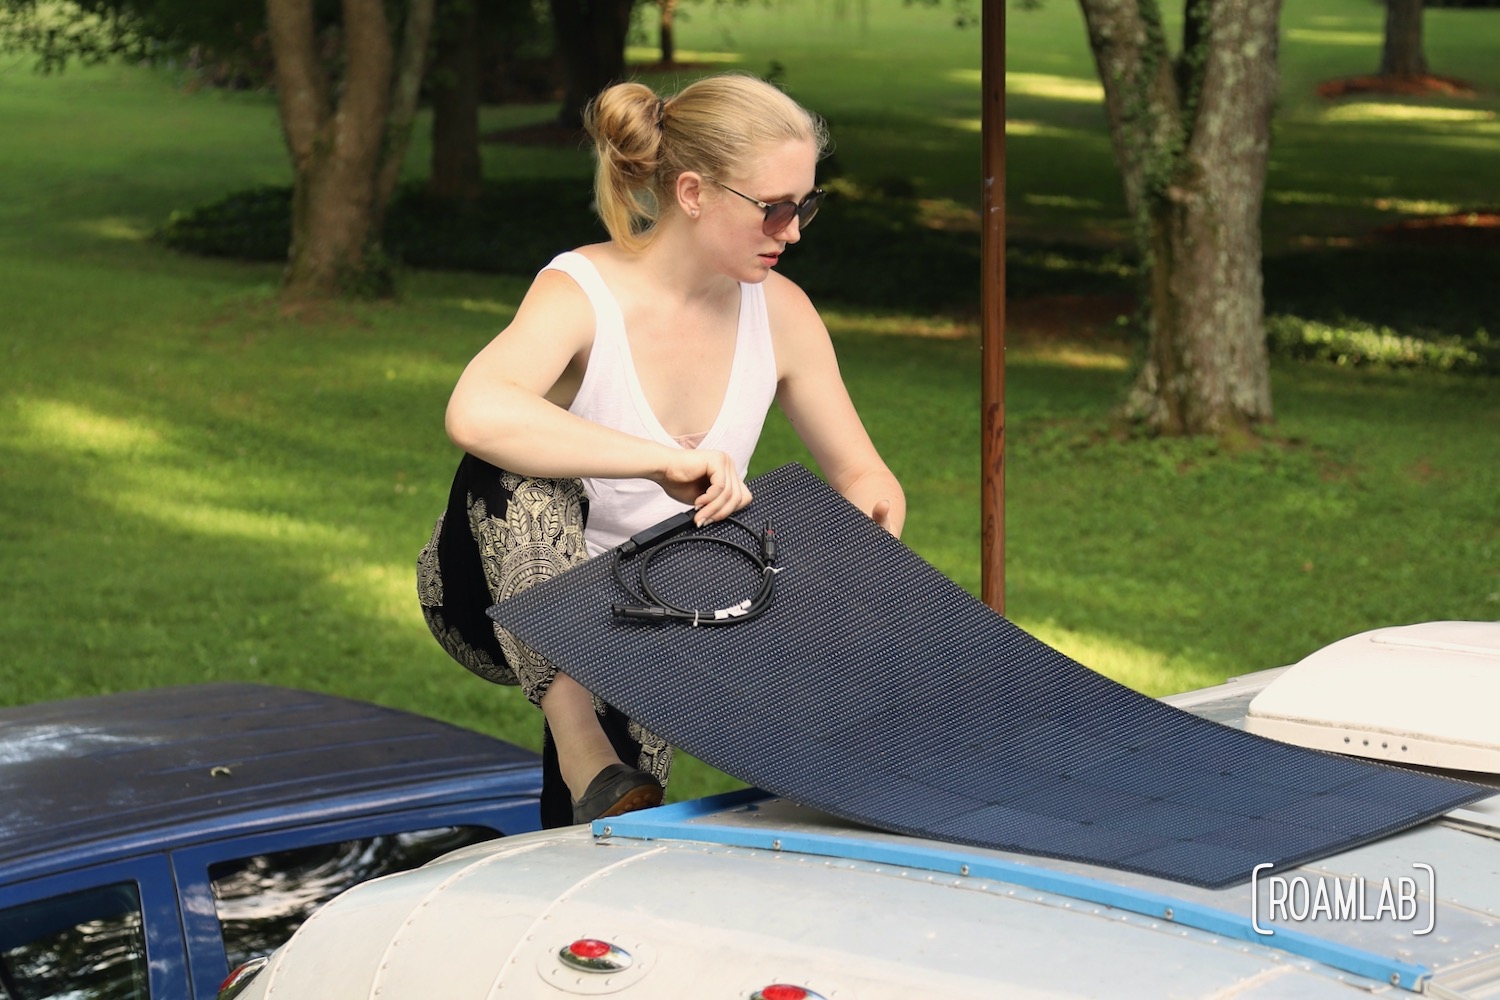 Woman placing a flexible solar panel on an aluminum camper roof.